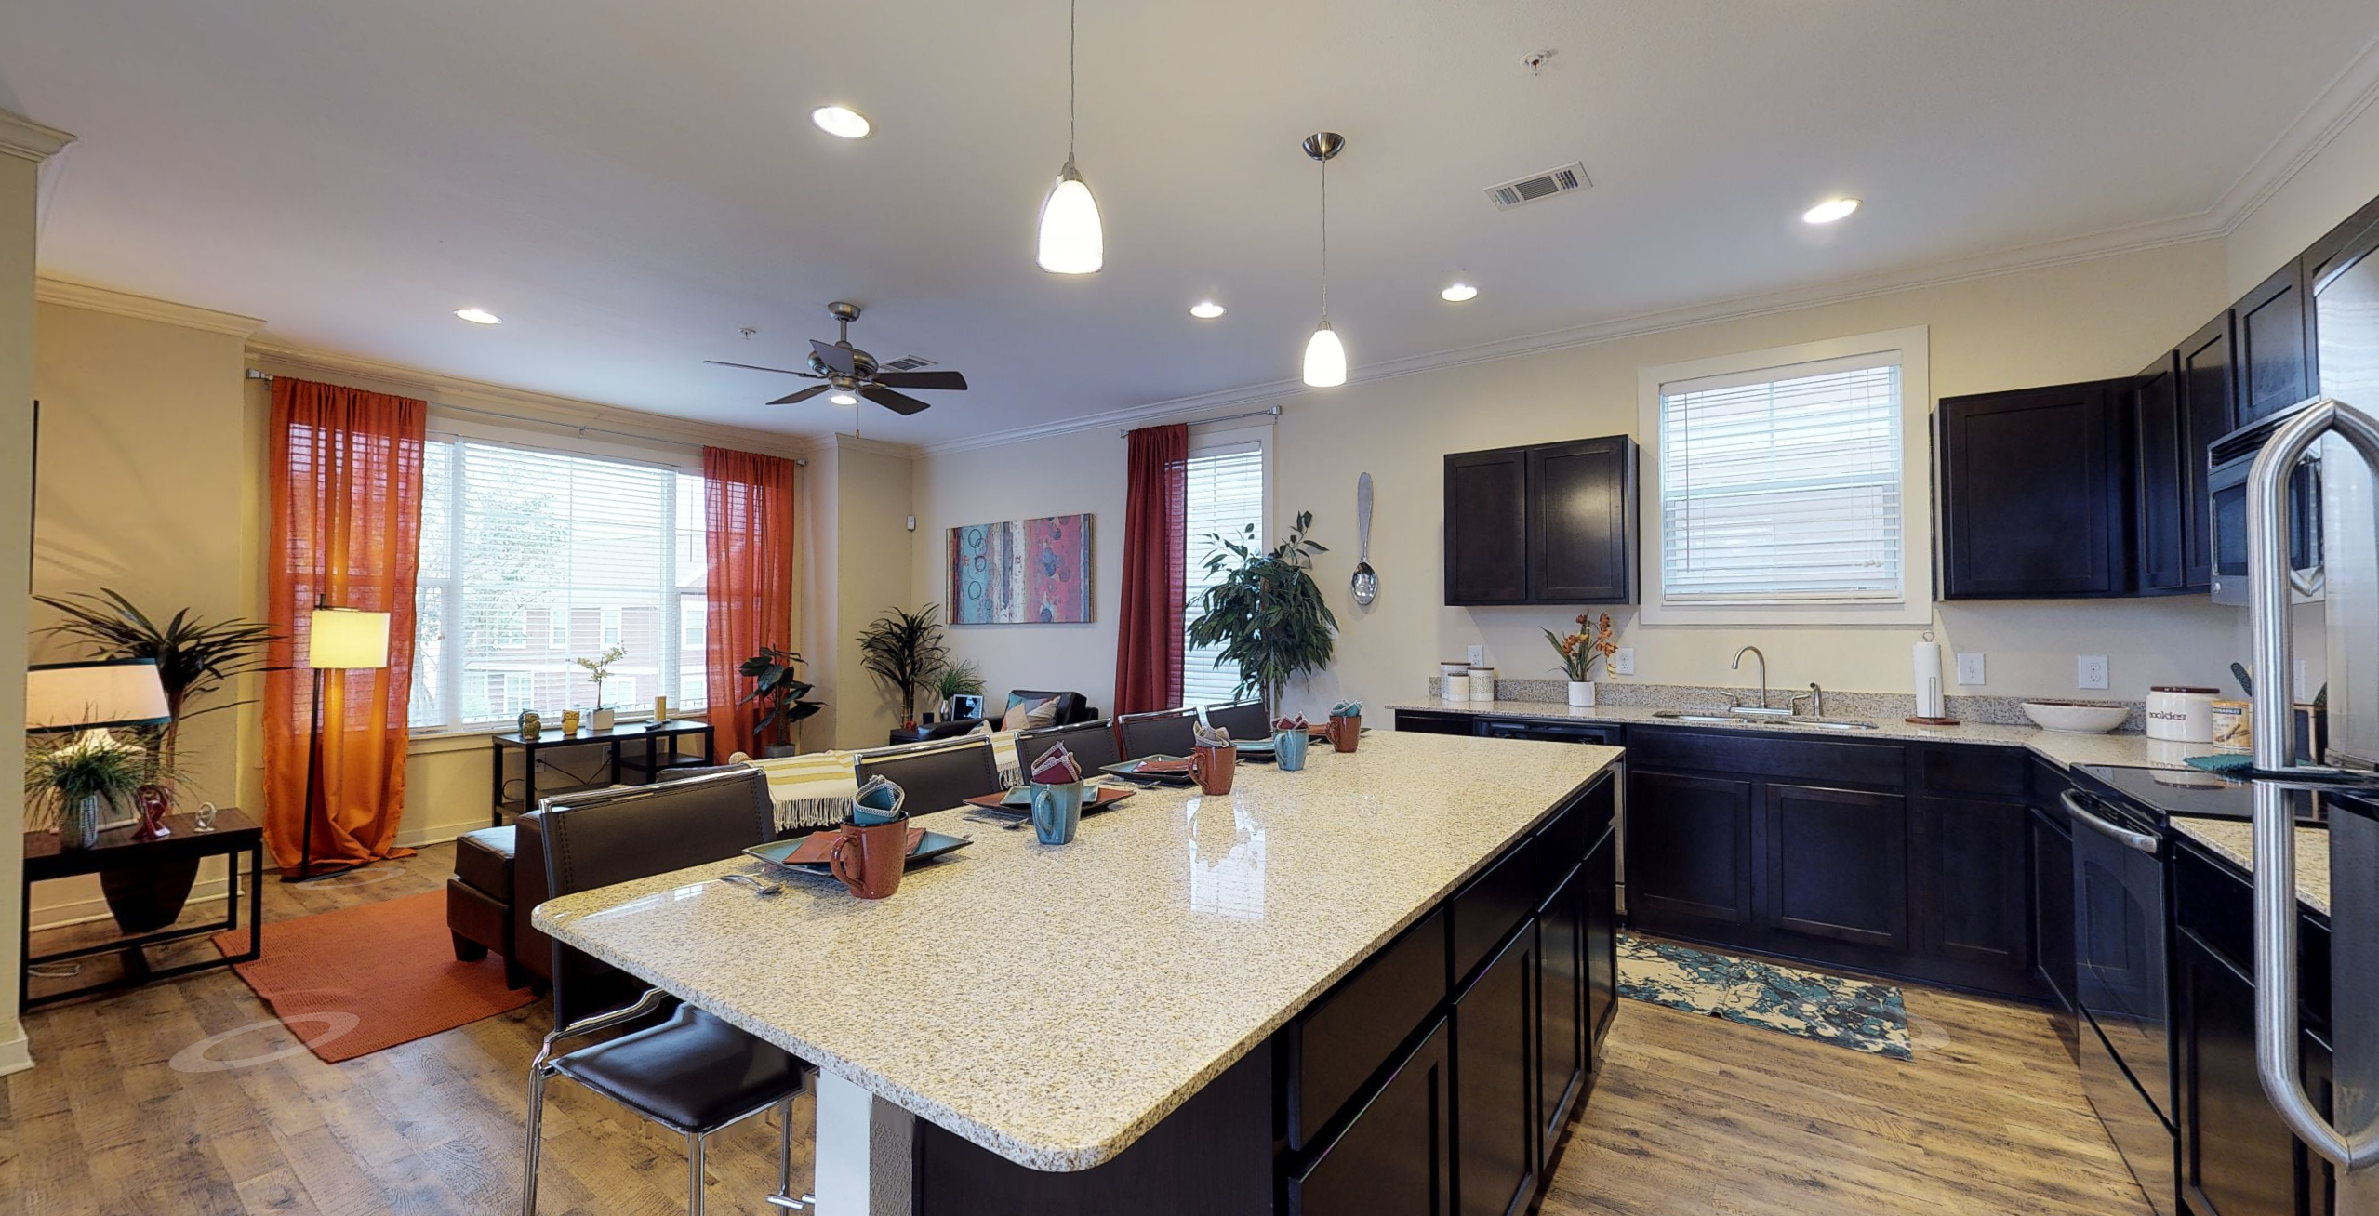 Kitchen with large island, granite counters, and stainless steel appliances